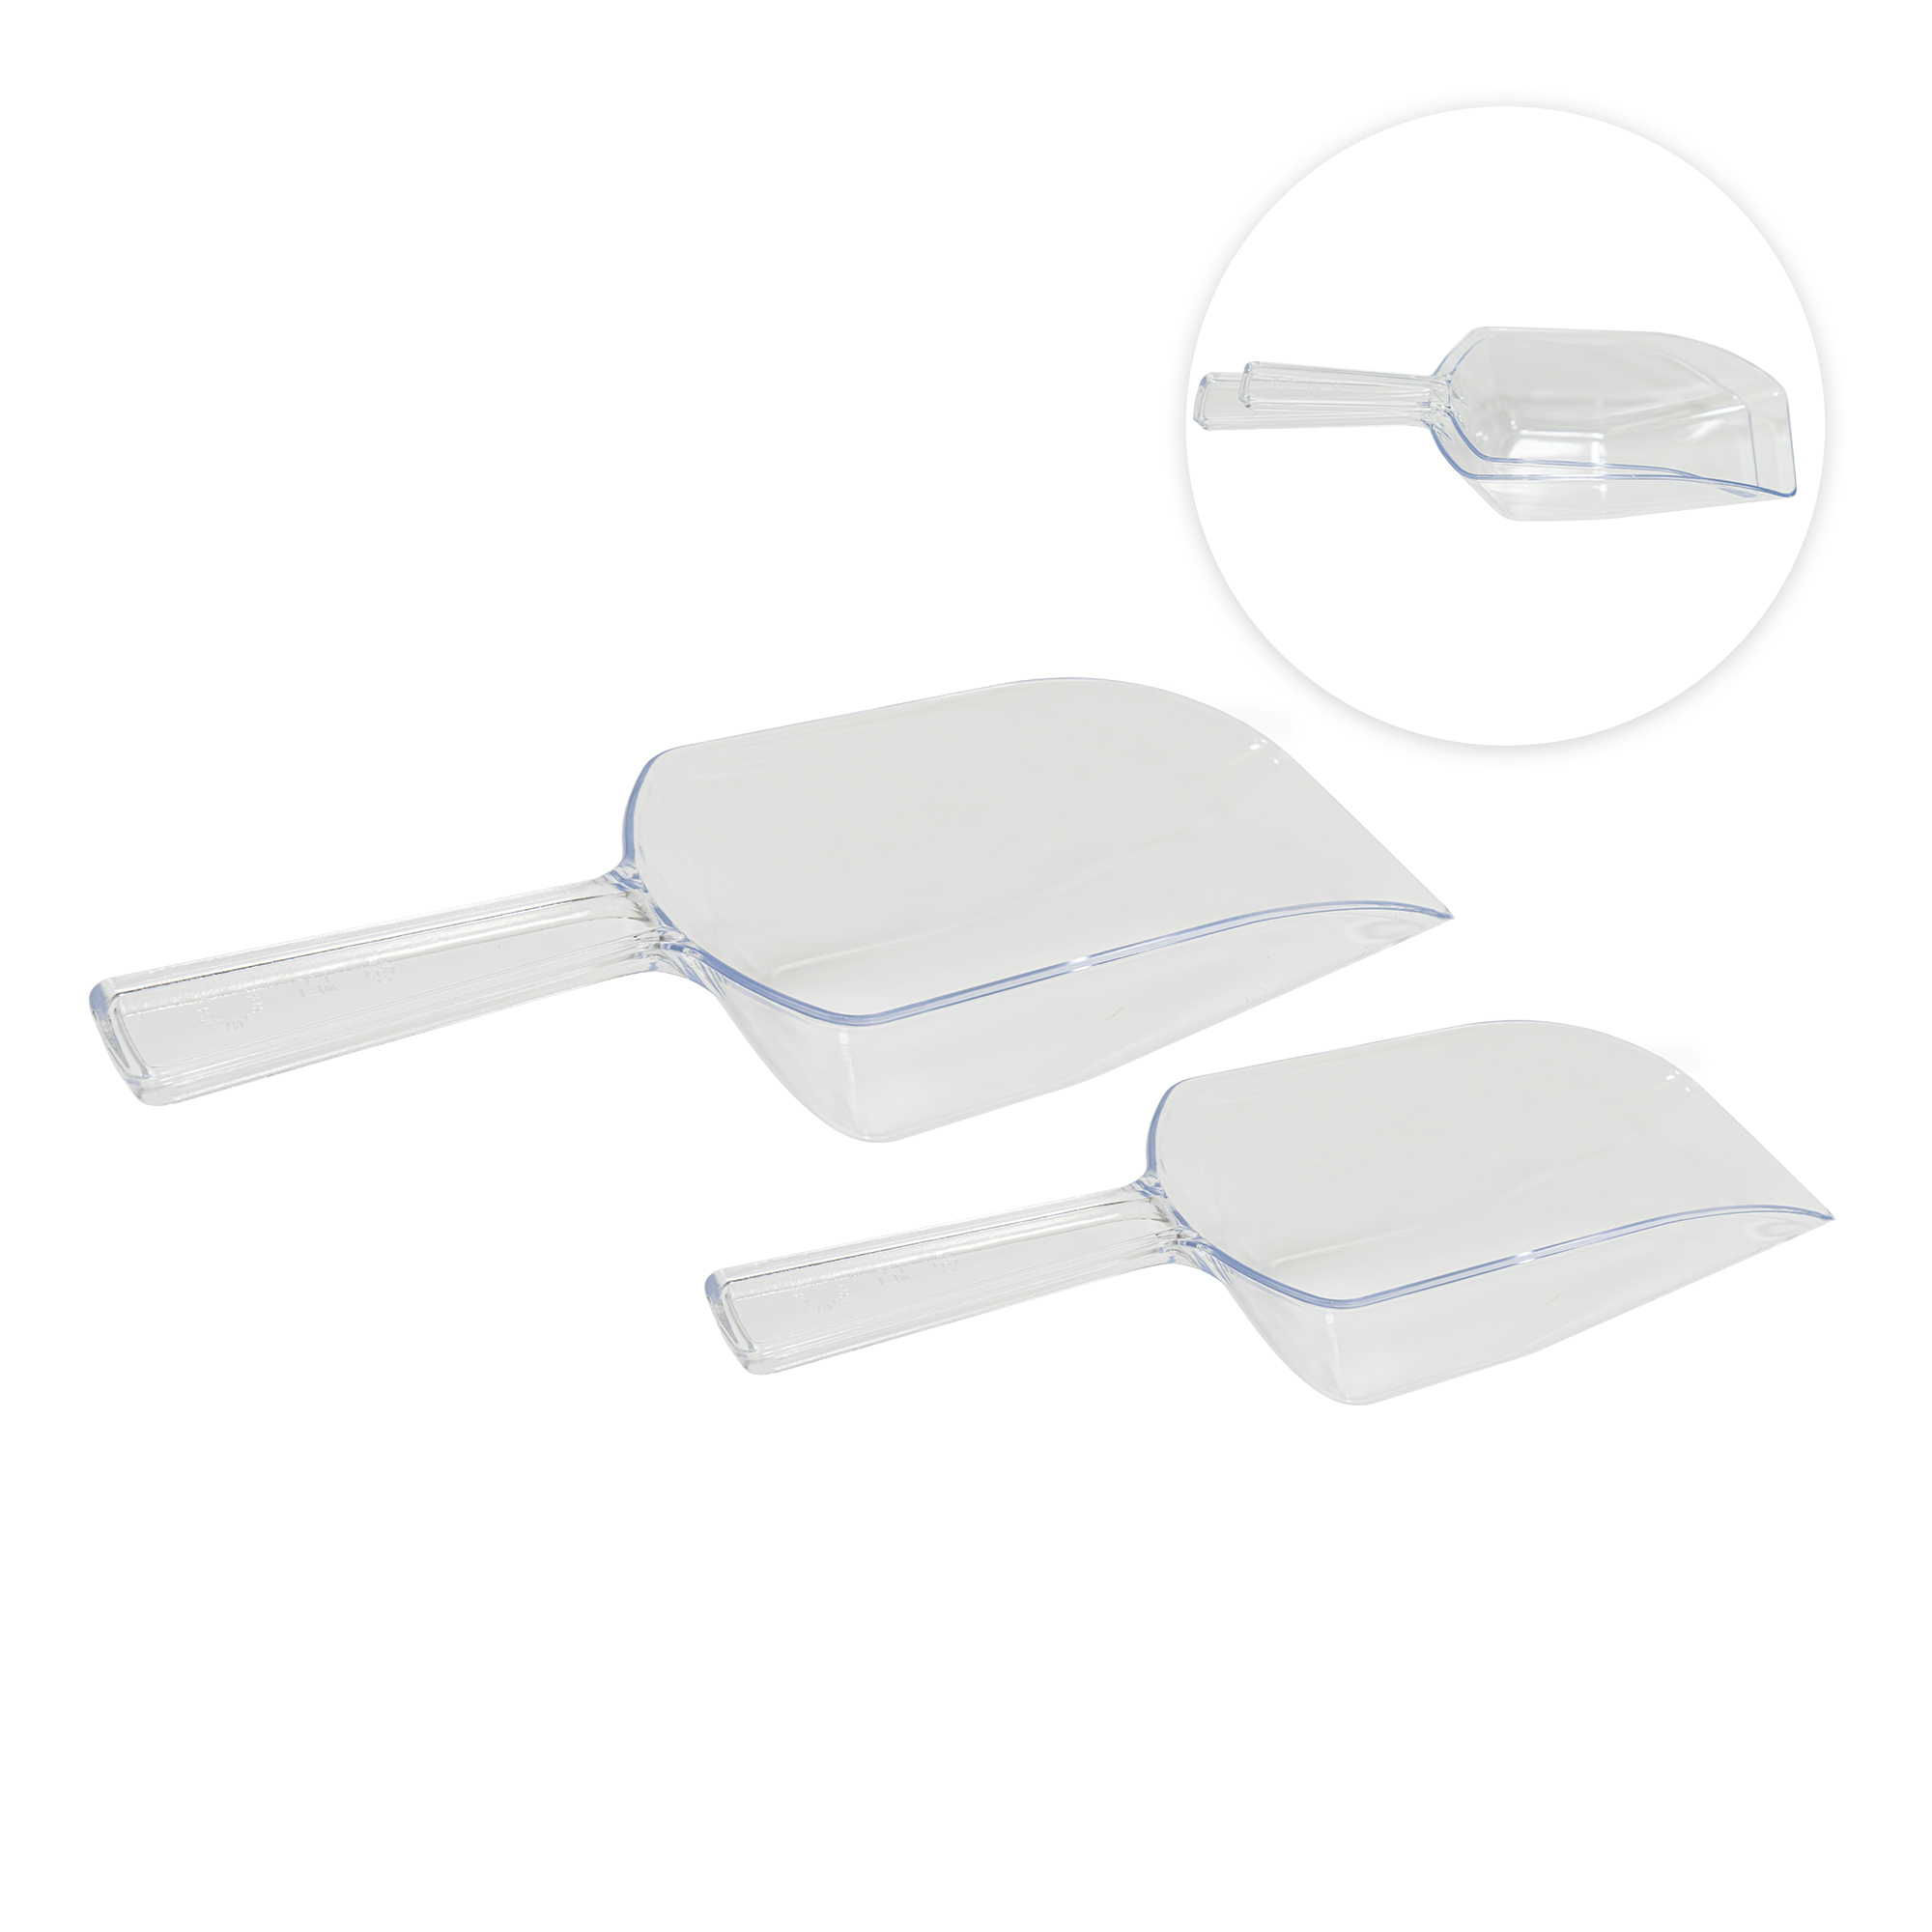 Plastic Candy Scoop 2pc Set - Clear